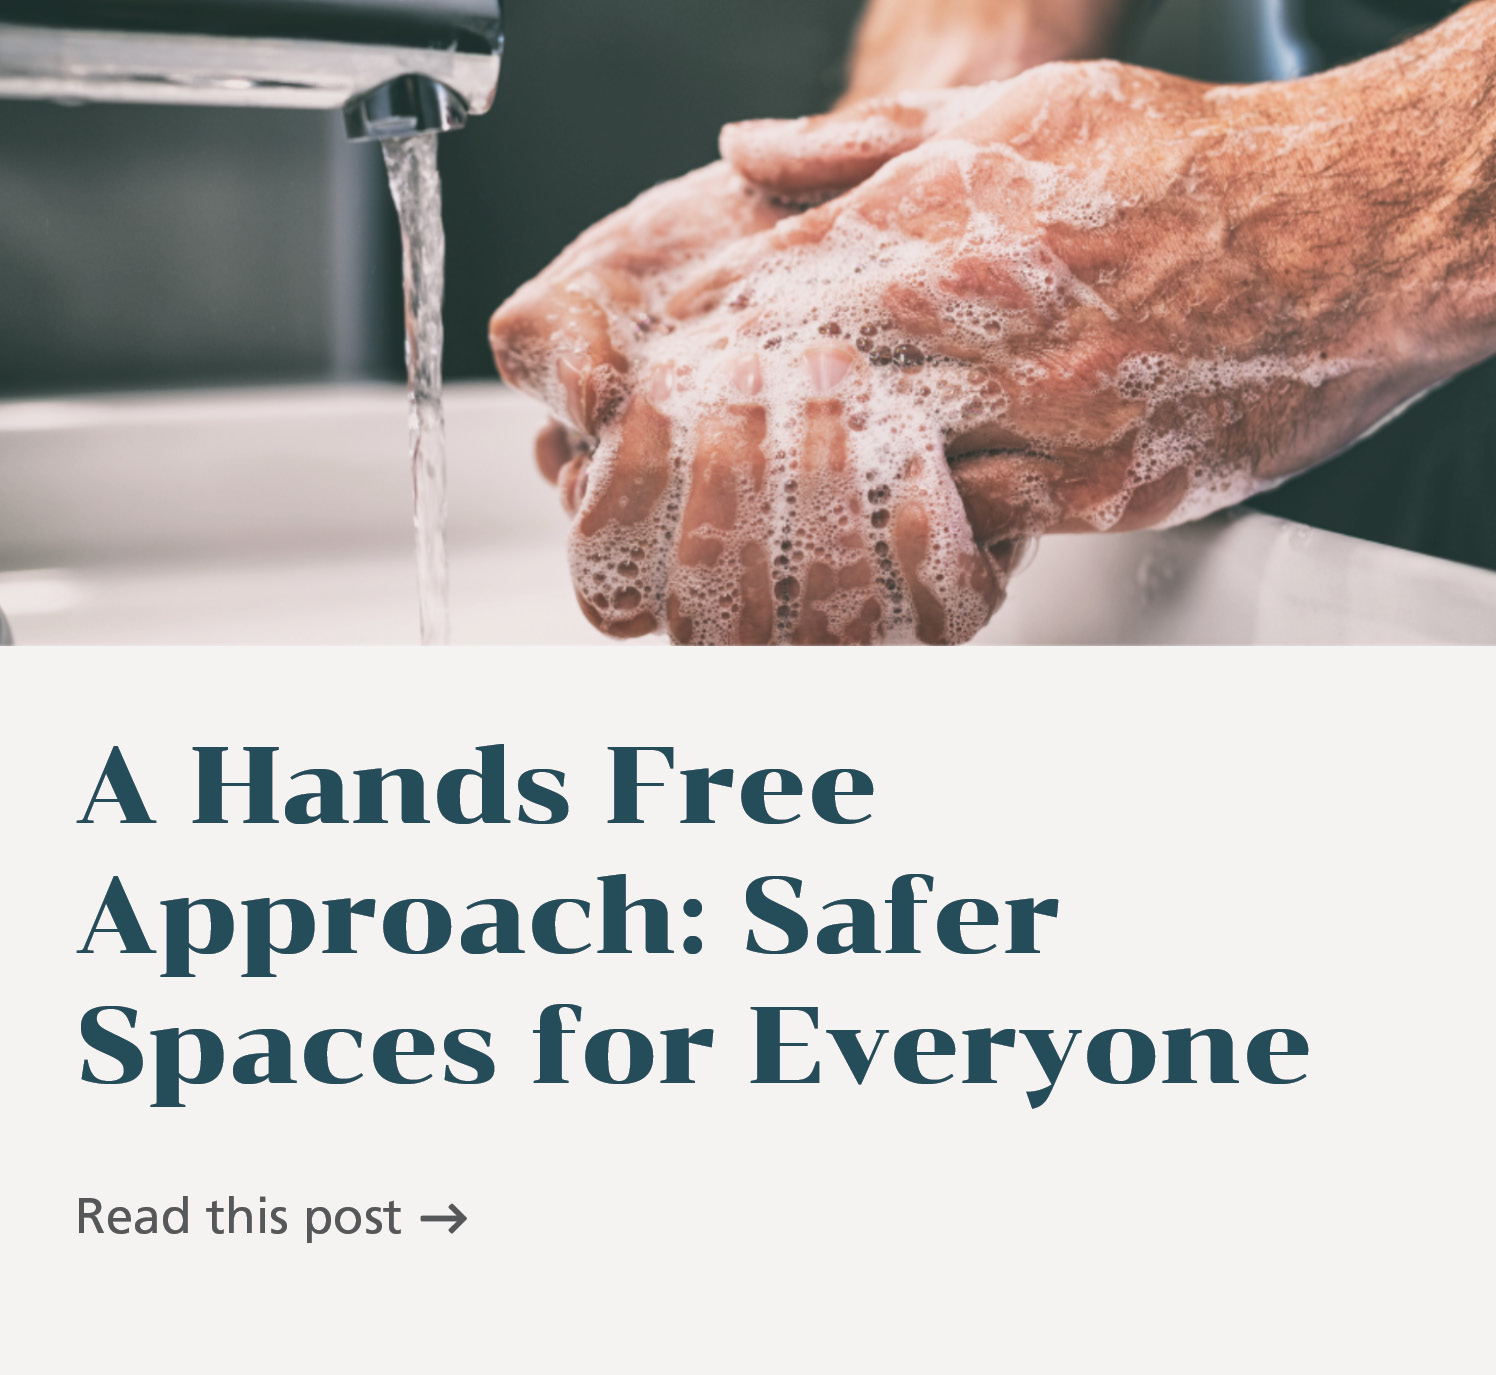 A hands free approach: safer spaces for everyone.